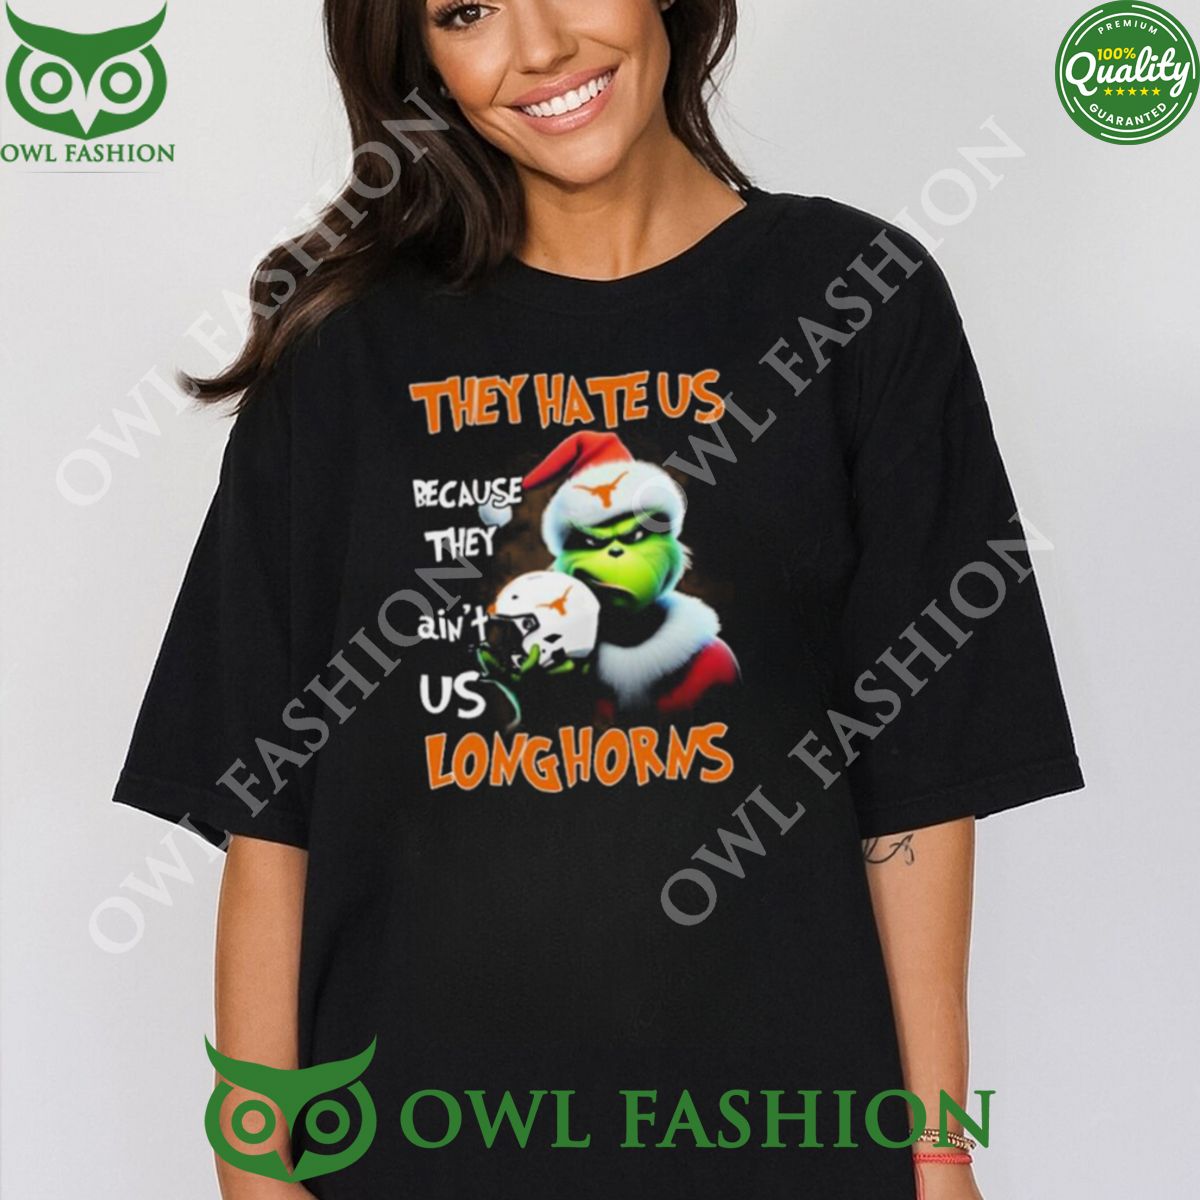 They Hate Us Because Ain’t Us Texas Longhorns Santa Grinch Christmas T-Shirt 